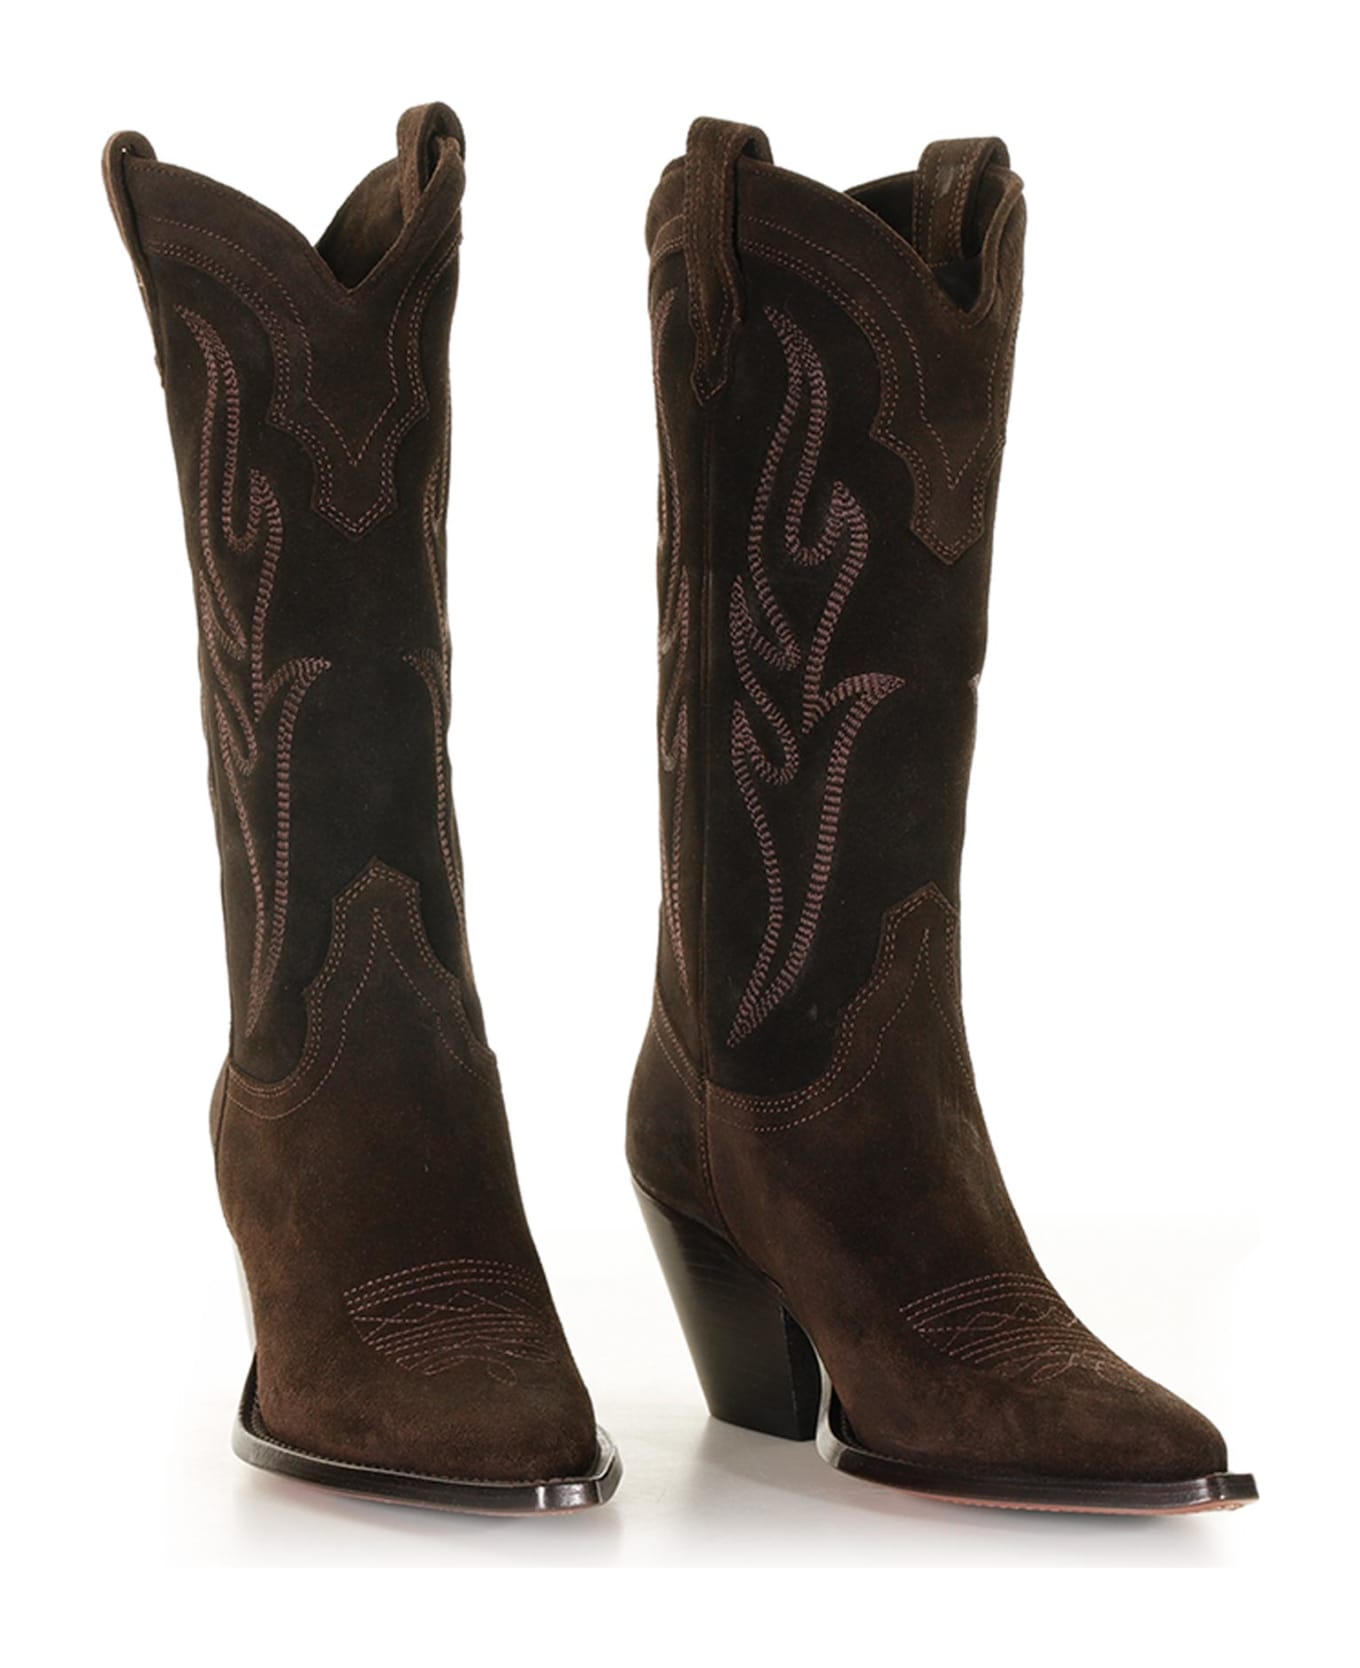 Sonora Santa Fe Cowboy Style Texan Boot In Embroidered Suede - BROWN ブーツ